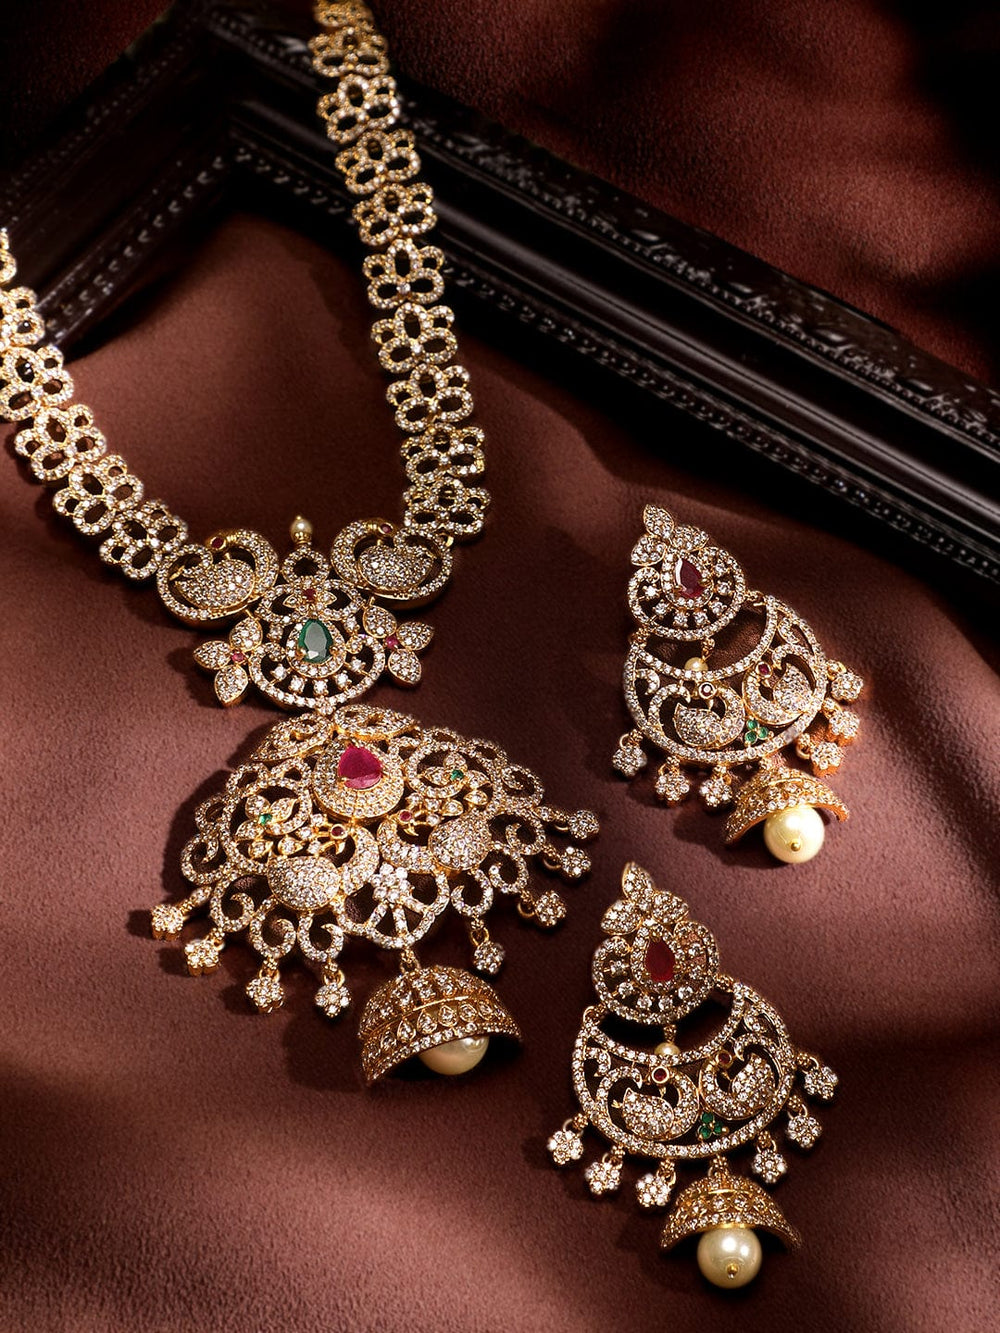 Rubans 22K Gold-Plated Peacock Motif Kemp & Zirconia Crystal Studded Handcrafted Necklace Set Jewellery Sets